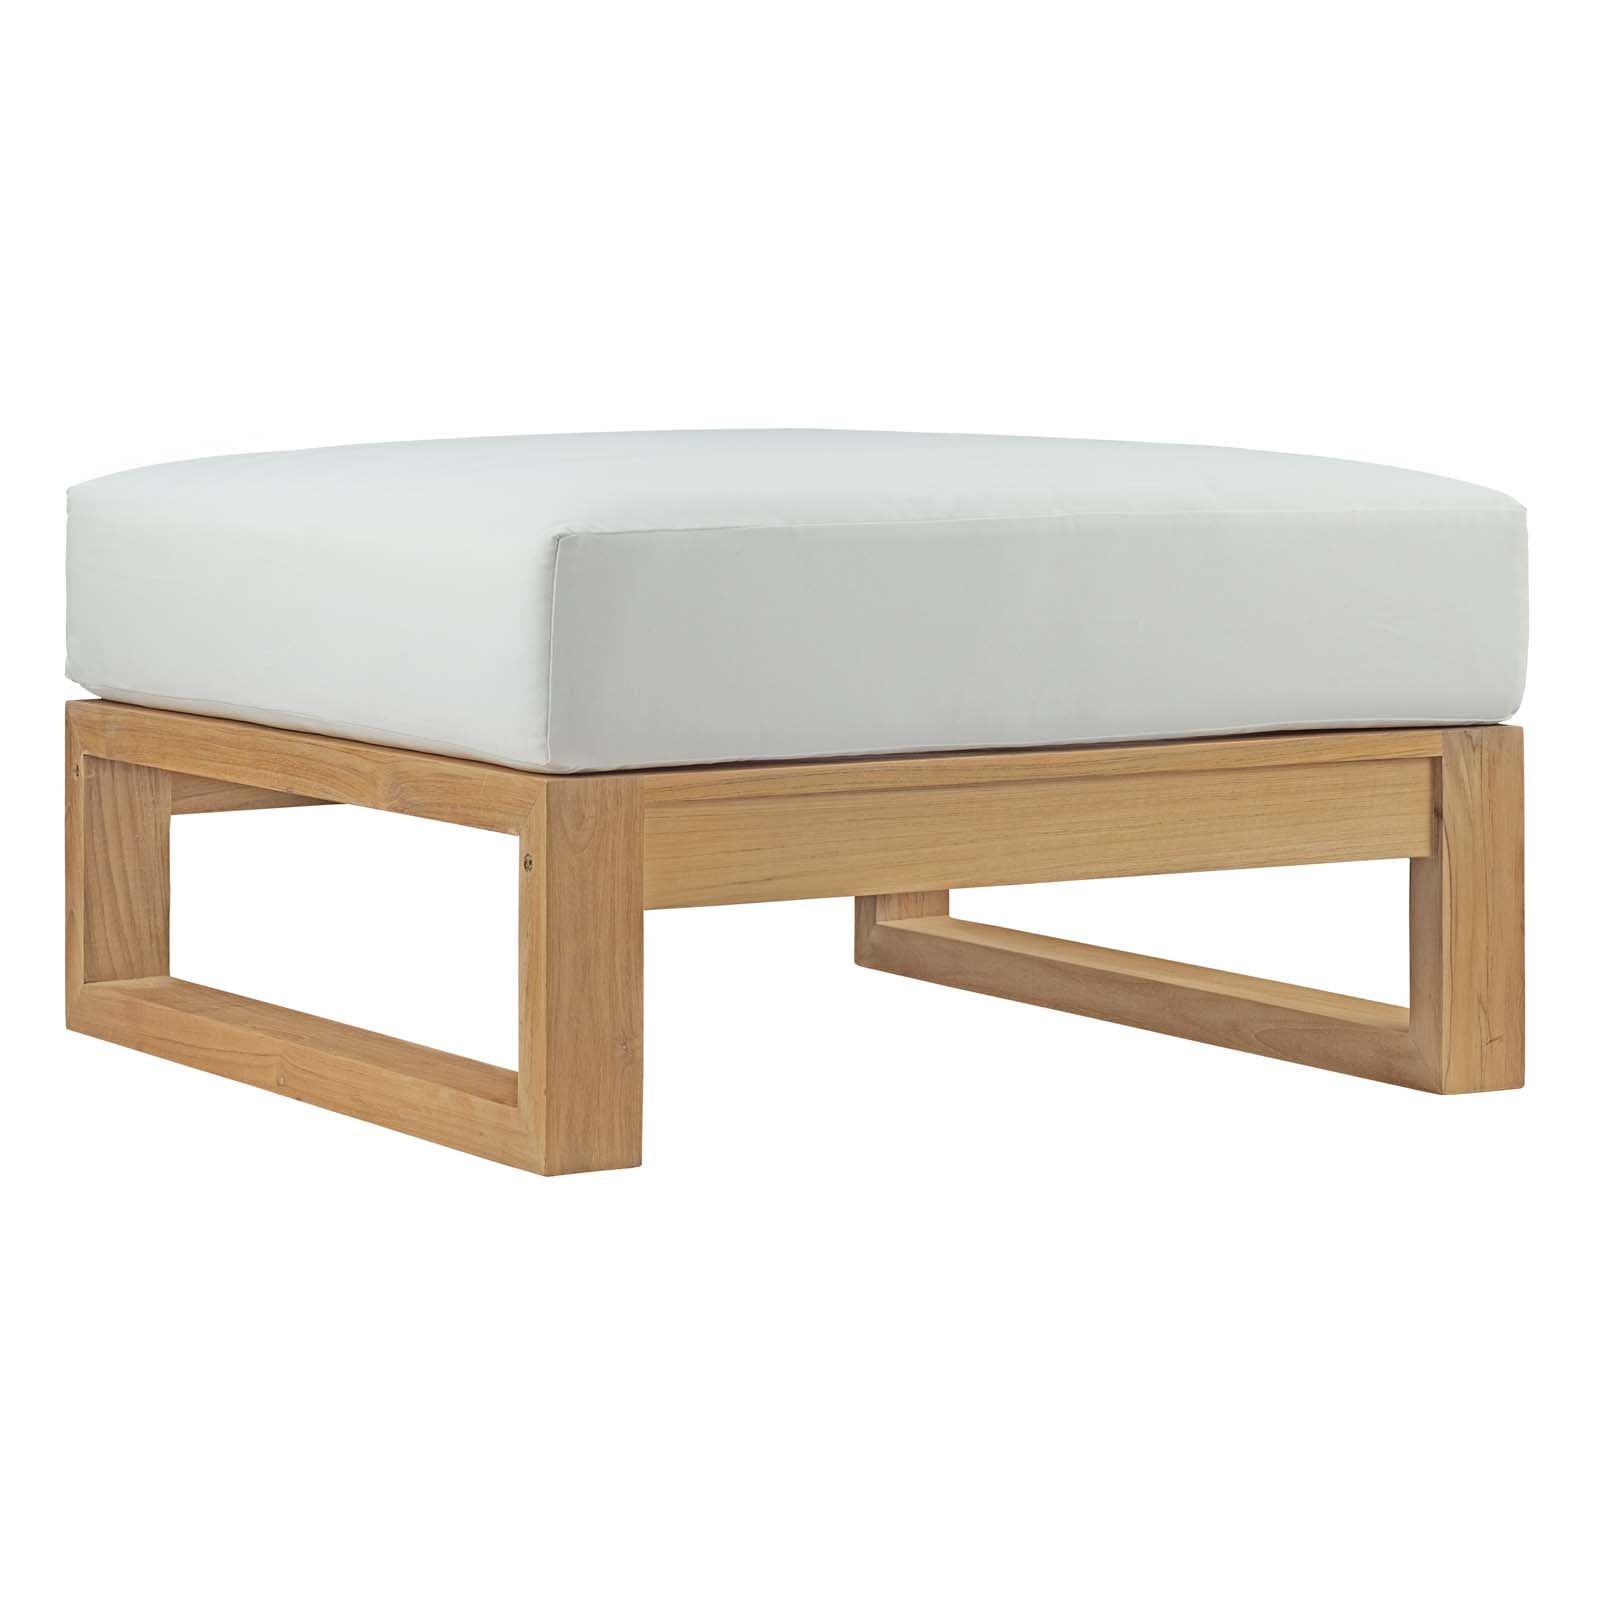 Modway Outdoor Stools & Benches - Upland Outdoor Ottoman Natural & White